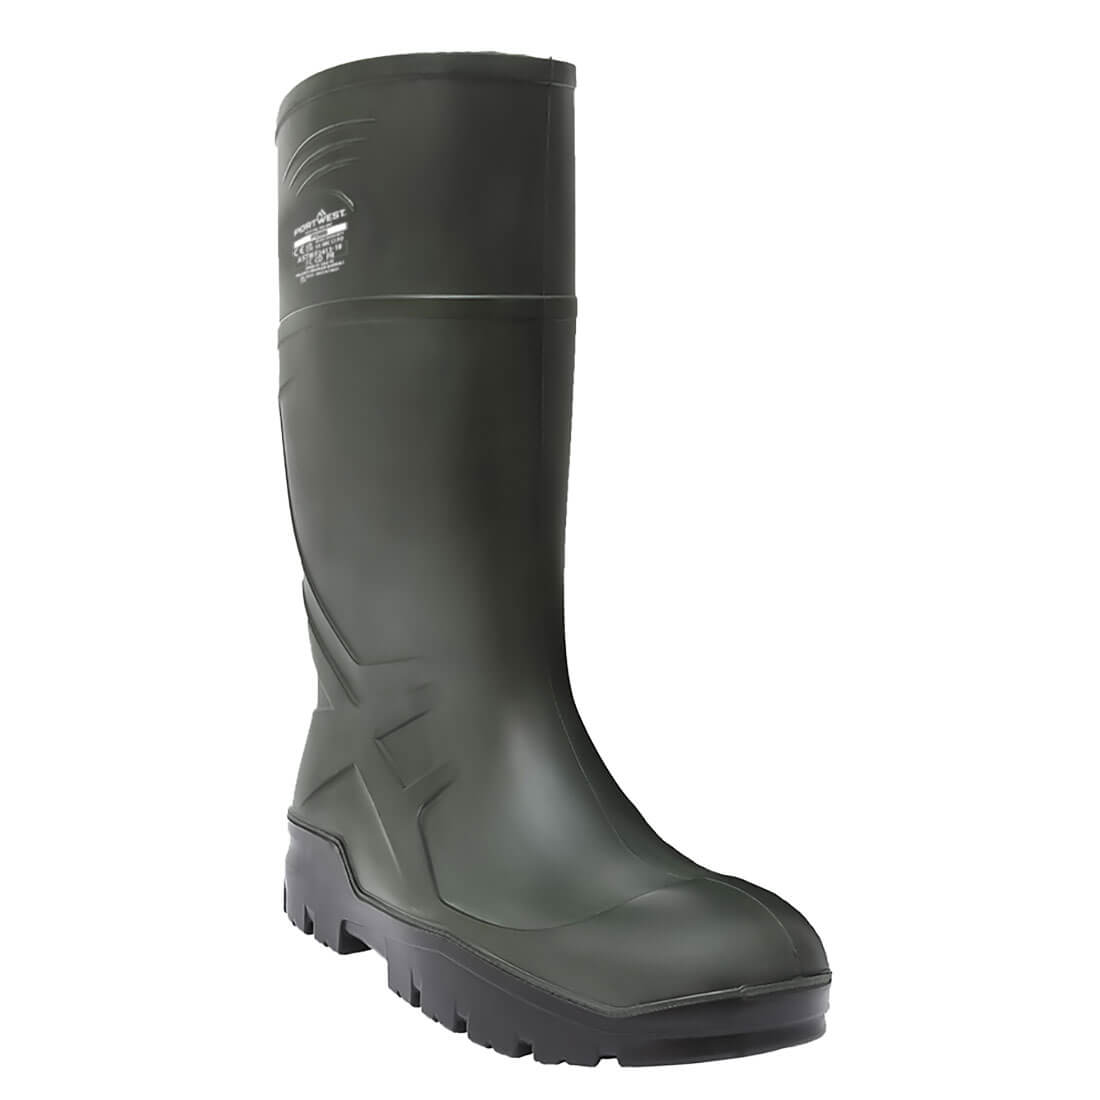 Foot Protection, Wellingtons